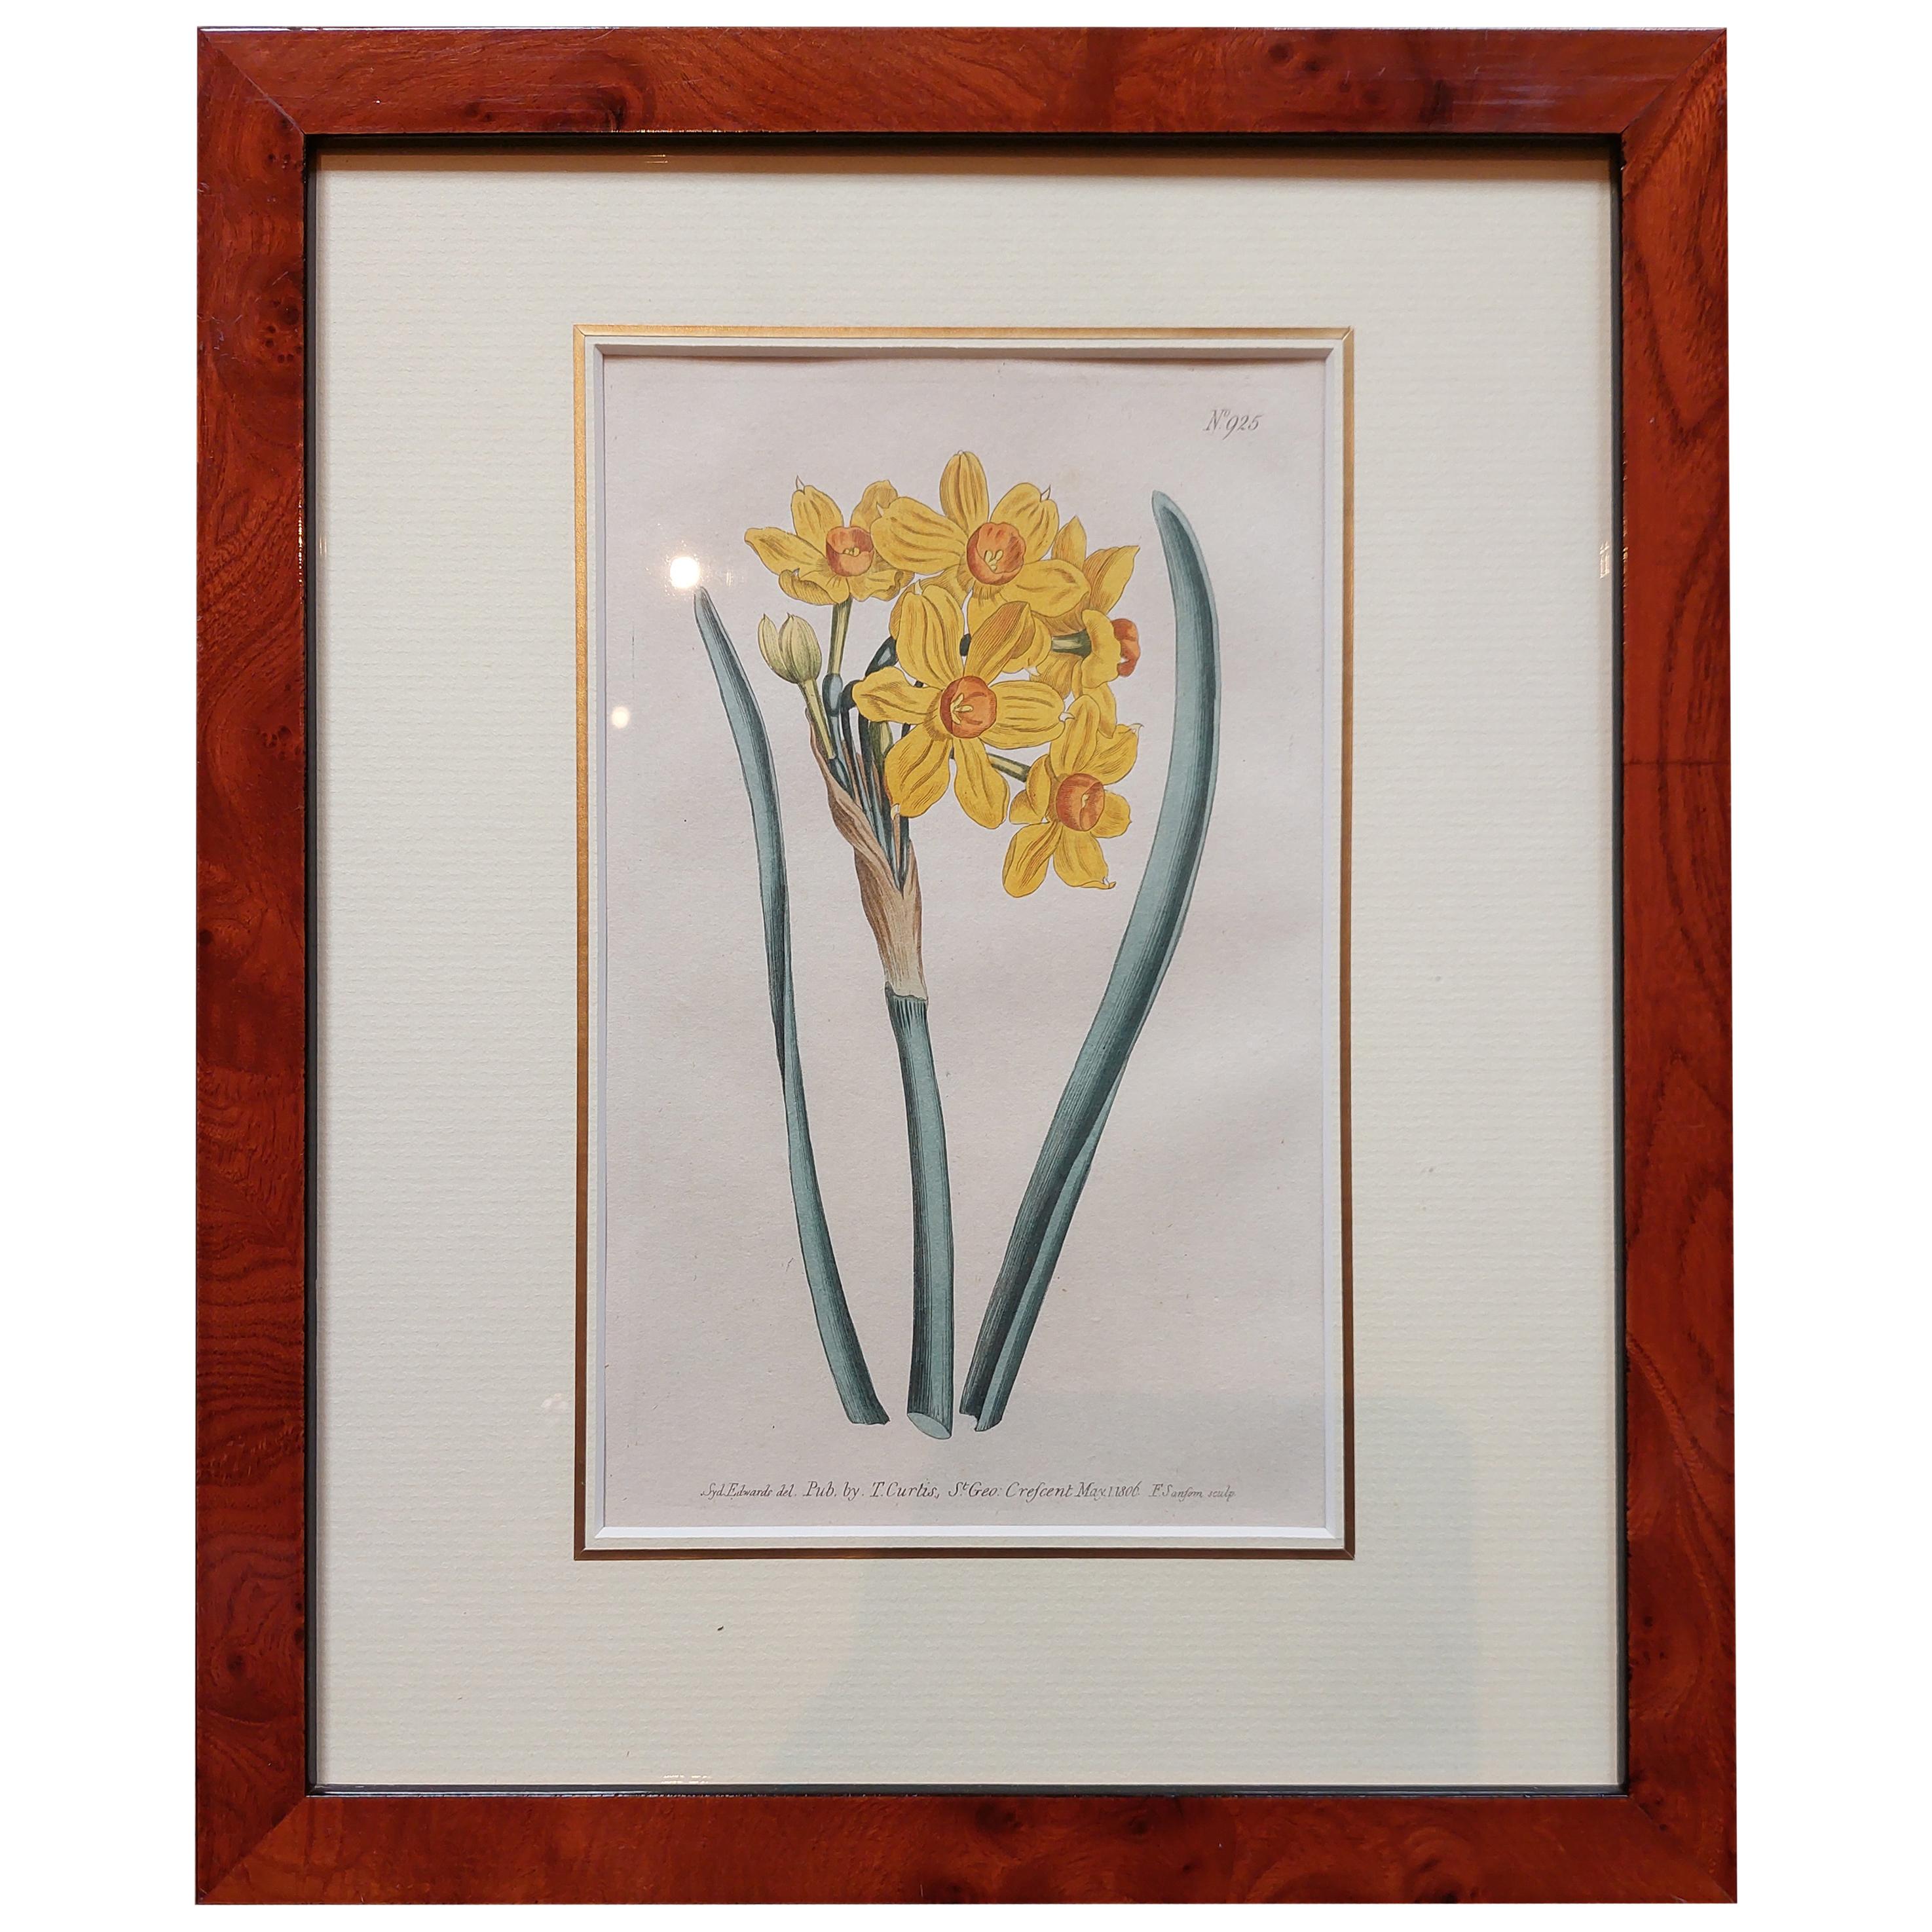 Antique Botany Print in Frame of Narcissus Tazetta or Polyanthus Narcissus, 1806